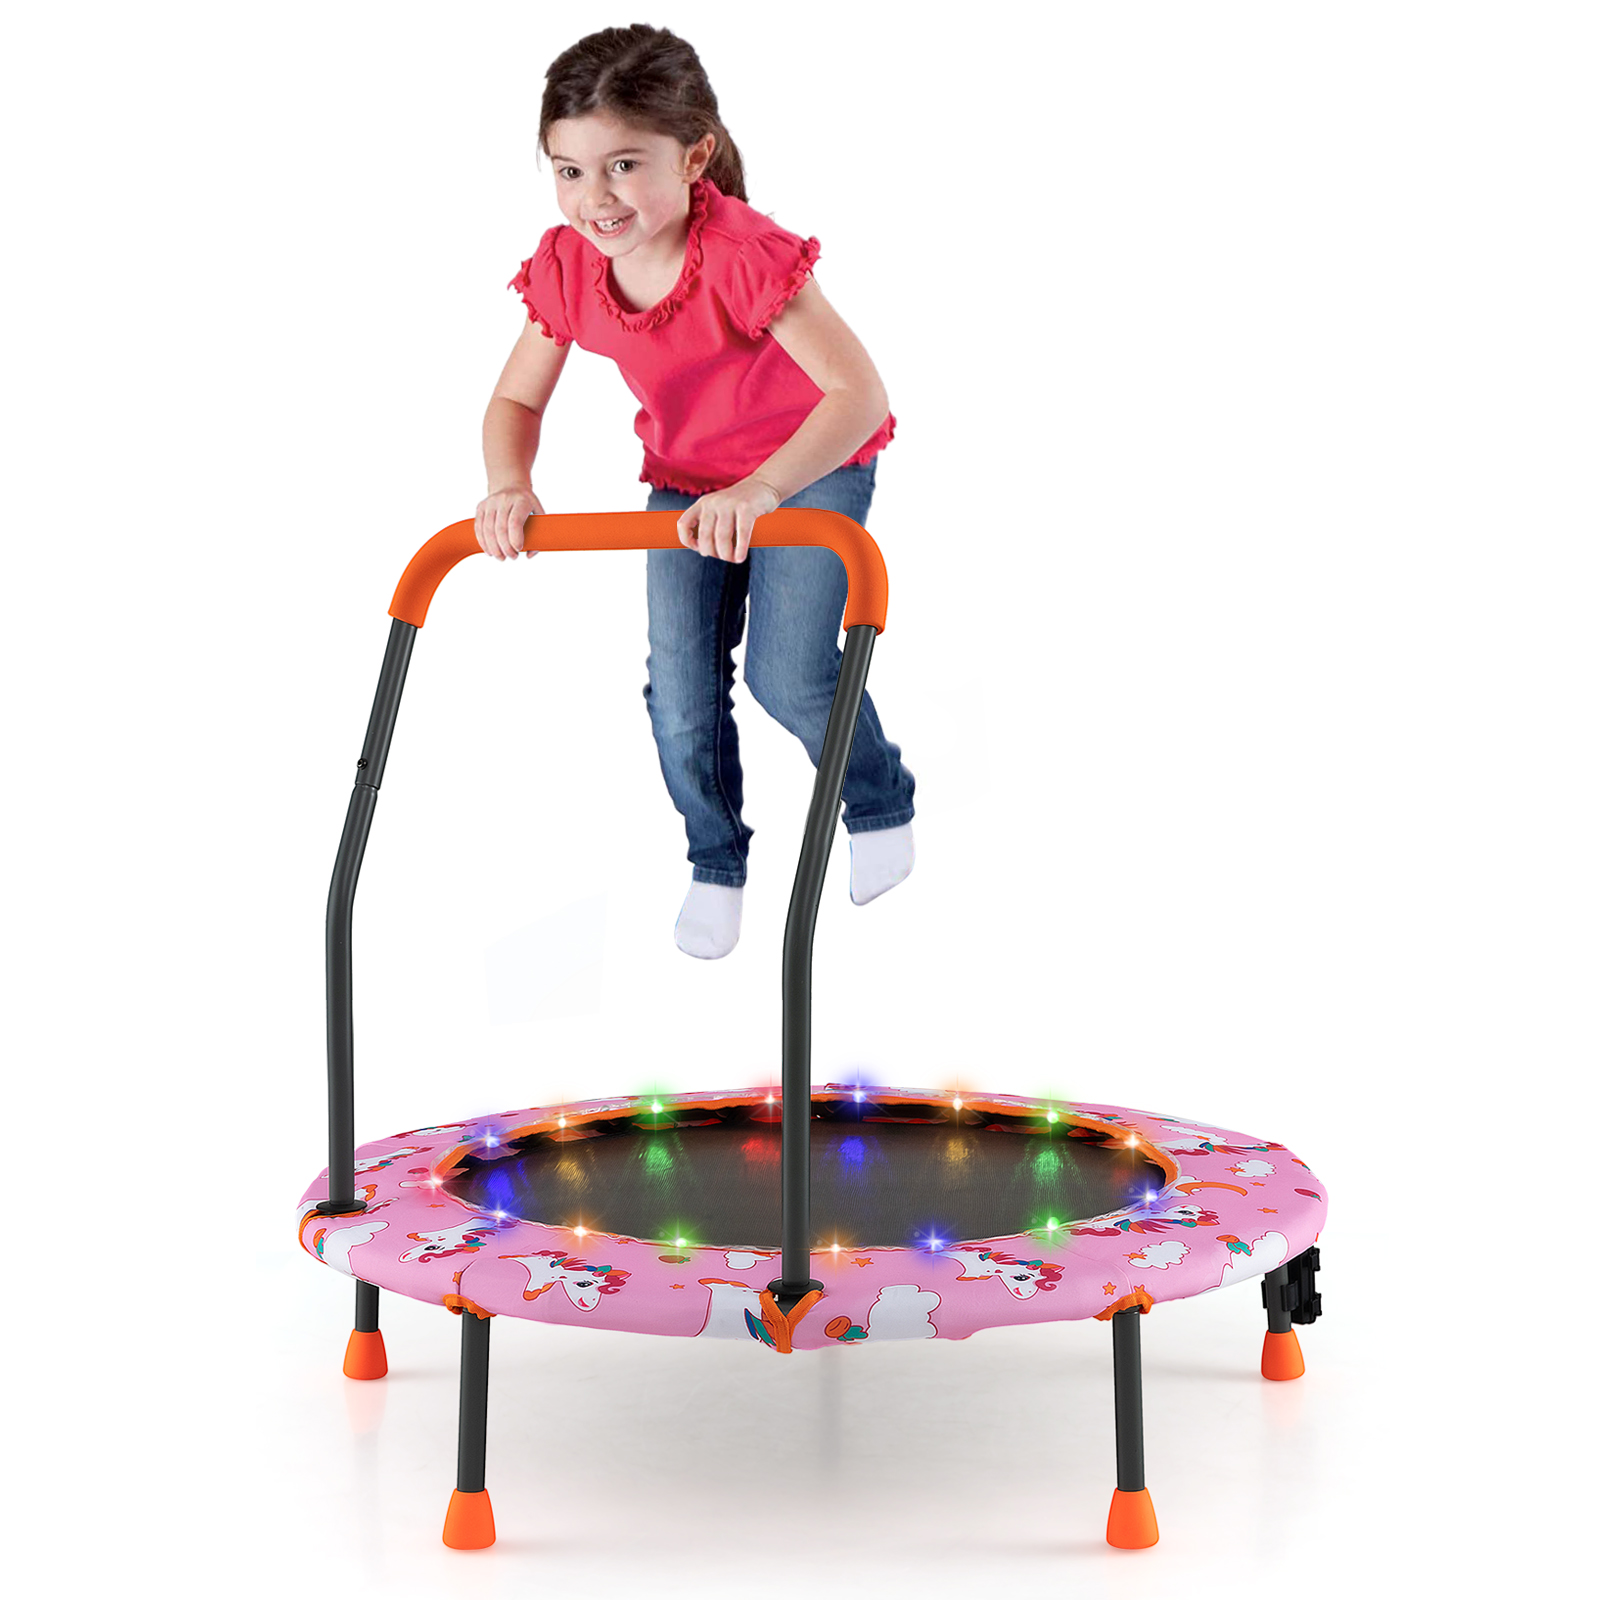 Mini Trampoline for Children with LED Lights and Safety Handle-Pink